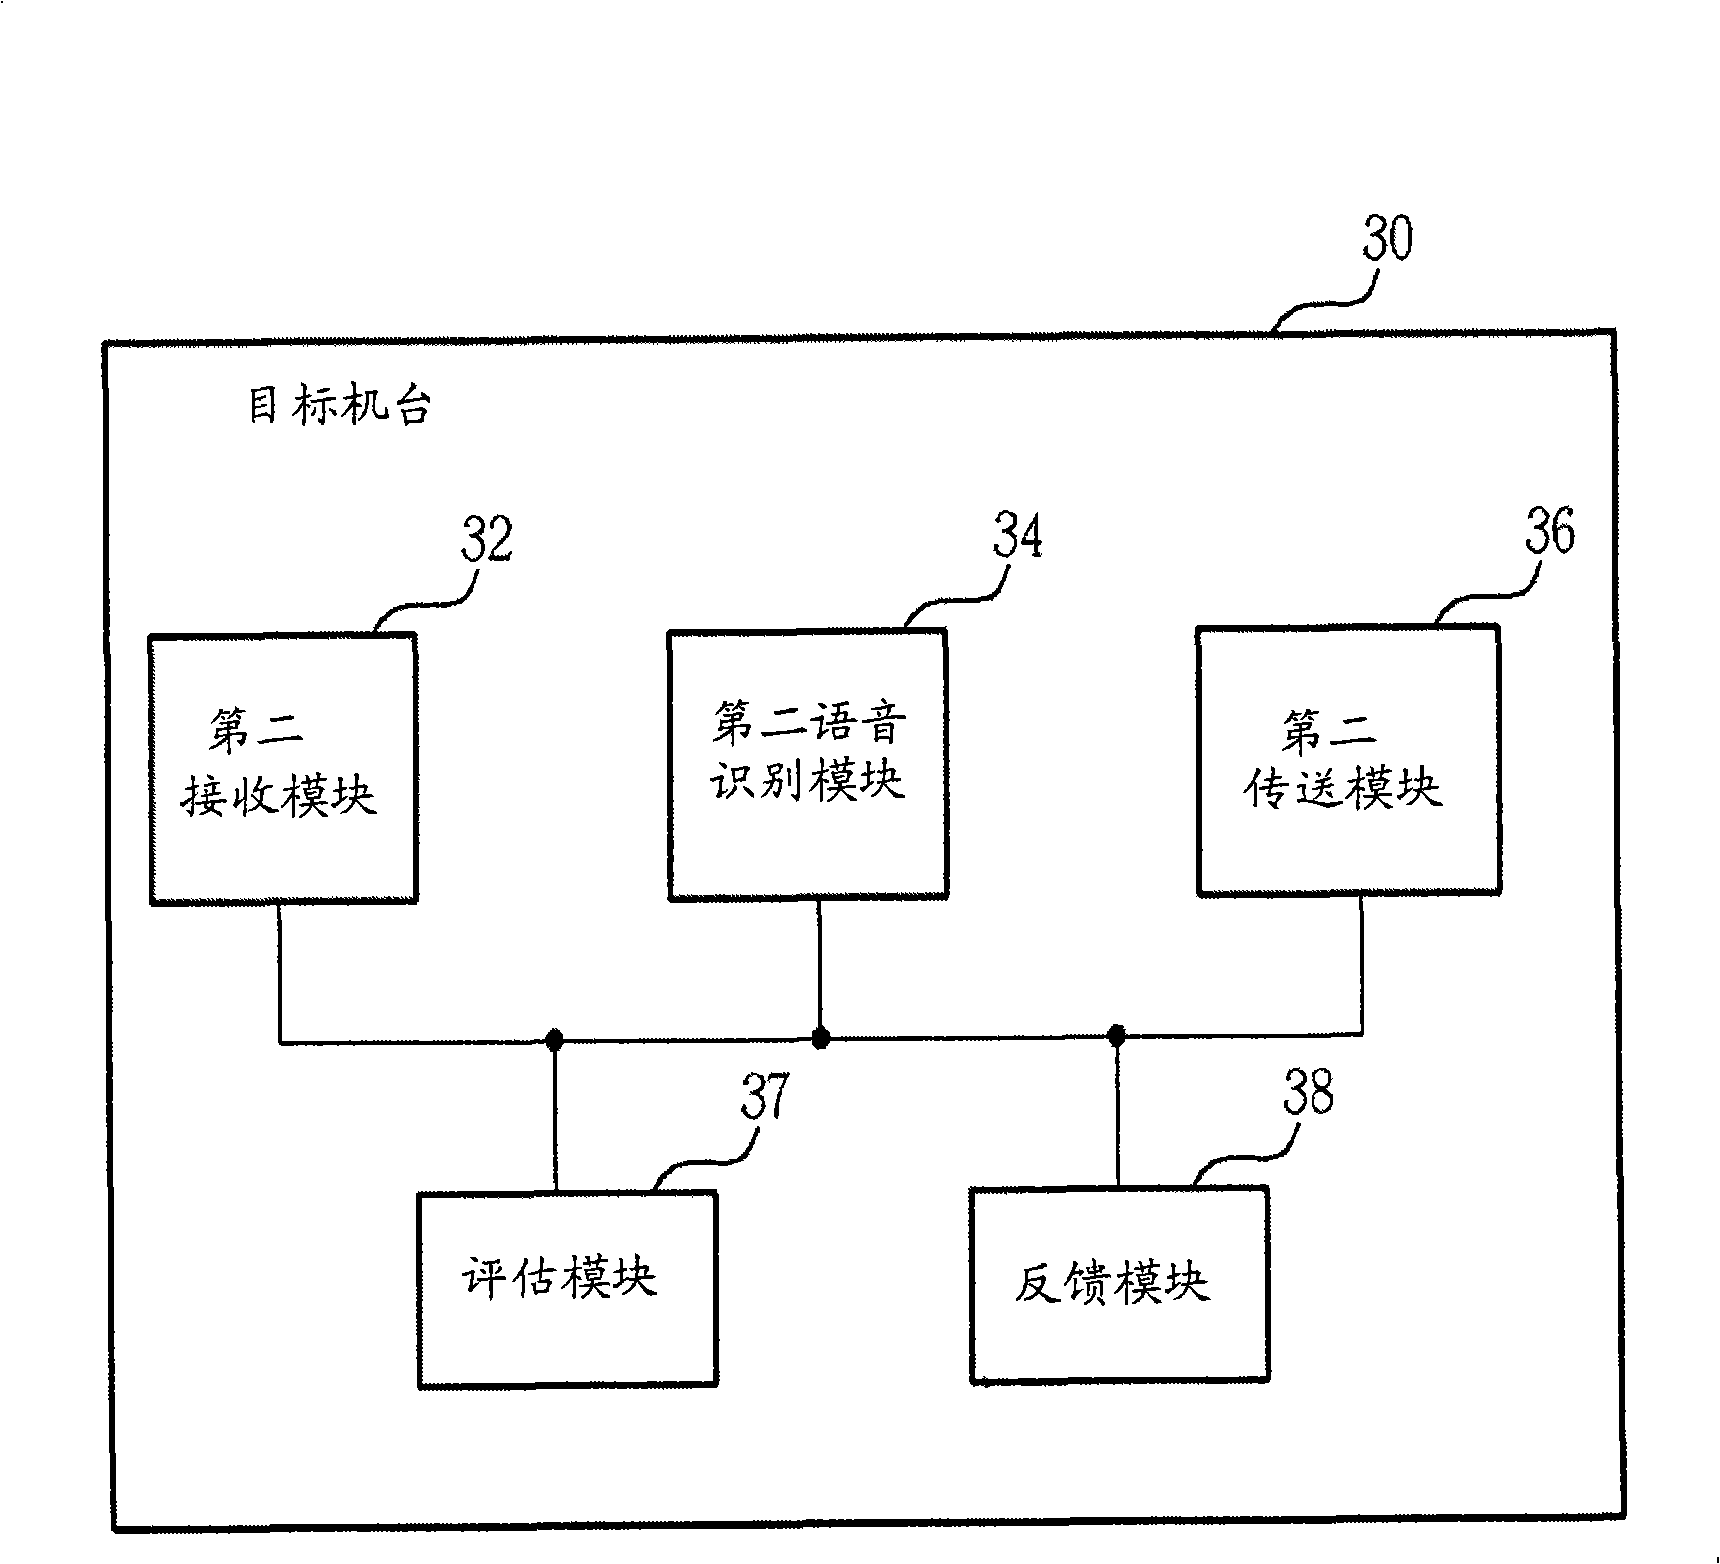 Method for cooperative voice command recognition and related system